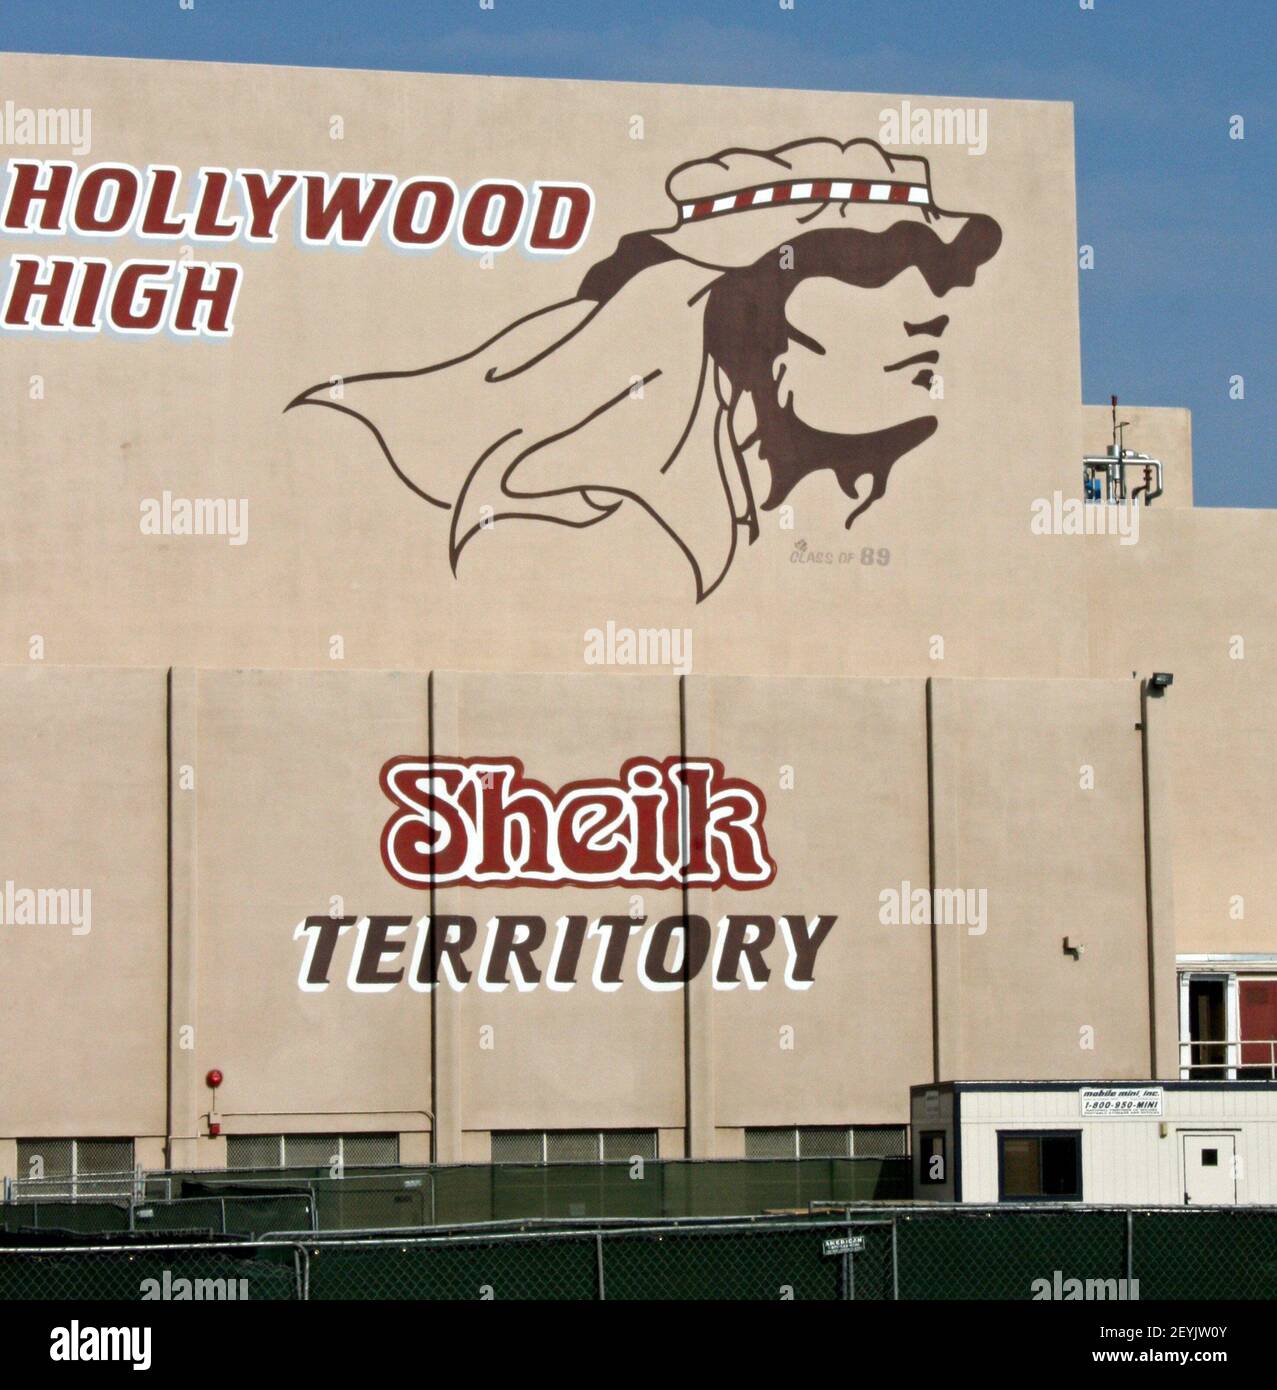 https://c8.alamy.com/comp/2EYJW0Y/hollywood-high-schools-mascot-is-the-sheiks-and-a-portrait-of-rudolph-valentino-in-the-movie-the-sheik-is-painted-on-the-auditorium-wall-overlooking-the-schools-athletic-fields-in-los-angeles-california-photo-by-marjie-lambertmiami-heraldmctsipa-usa-2EYJW0Y.jpg